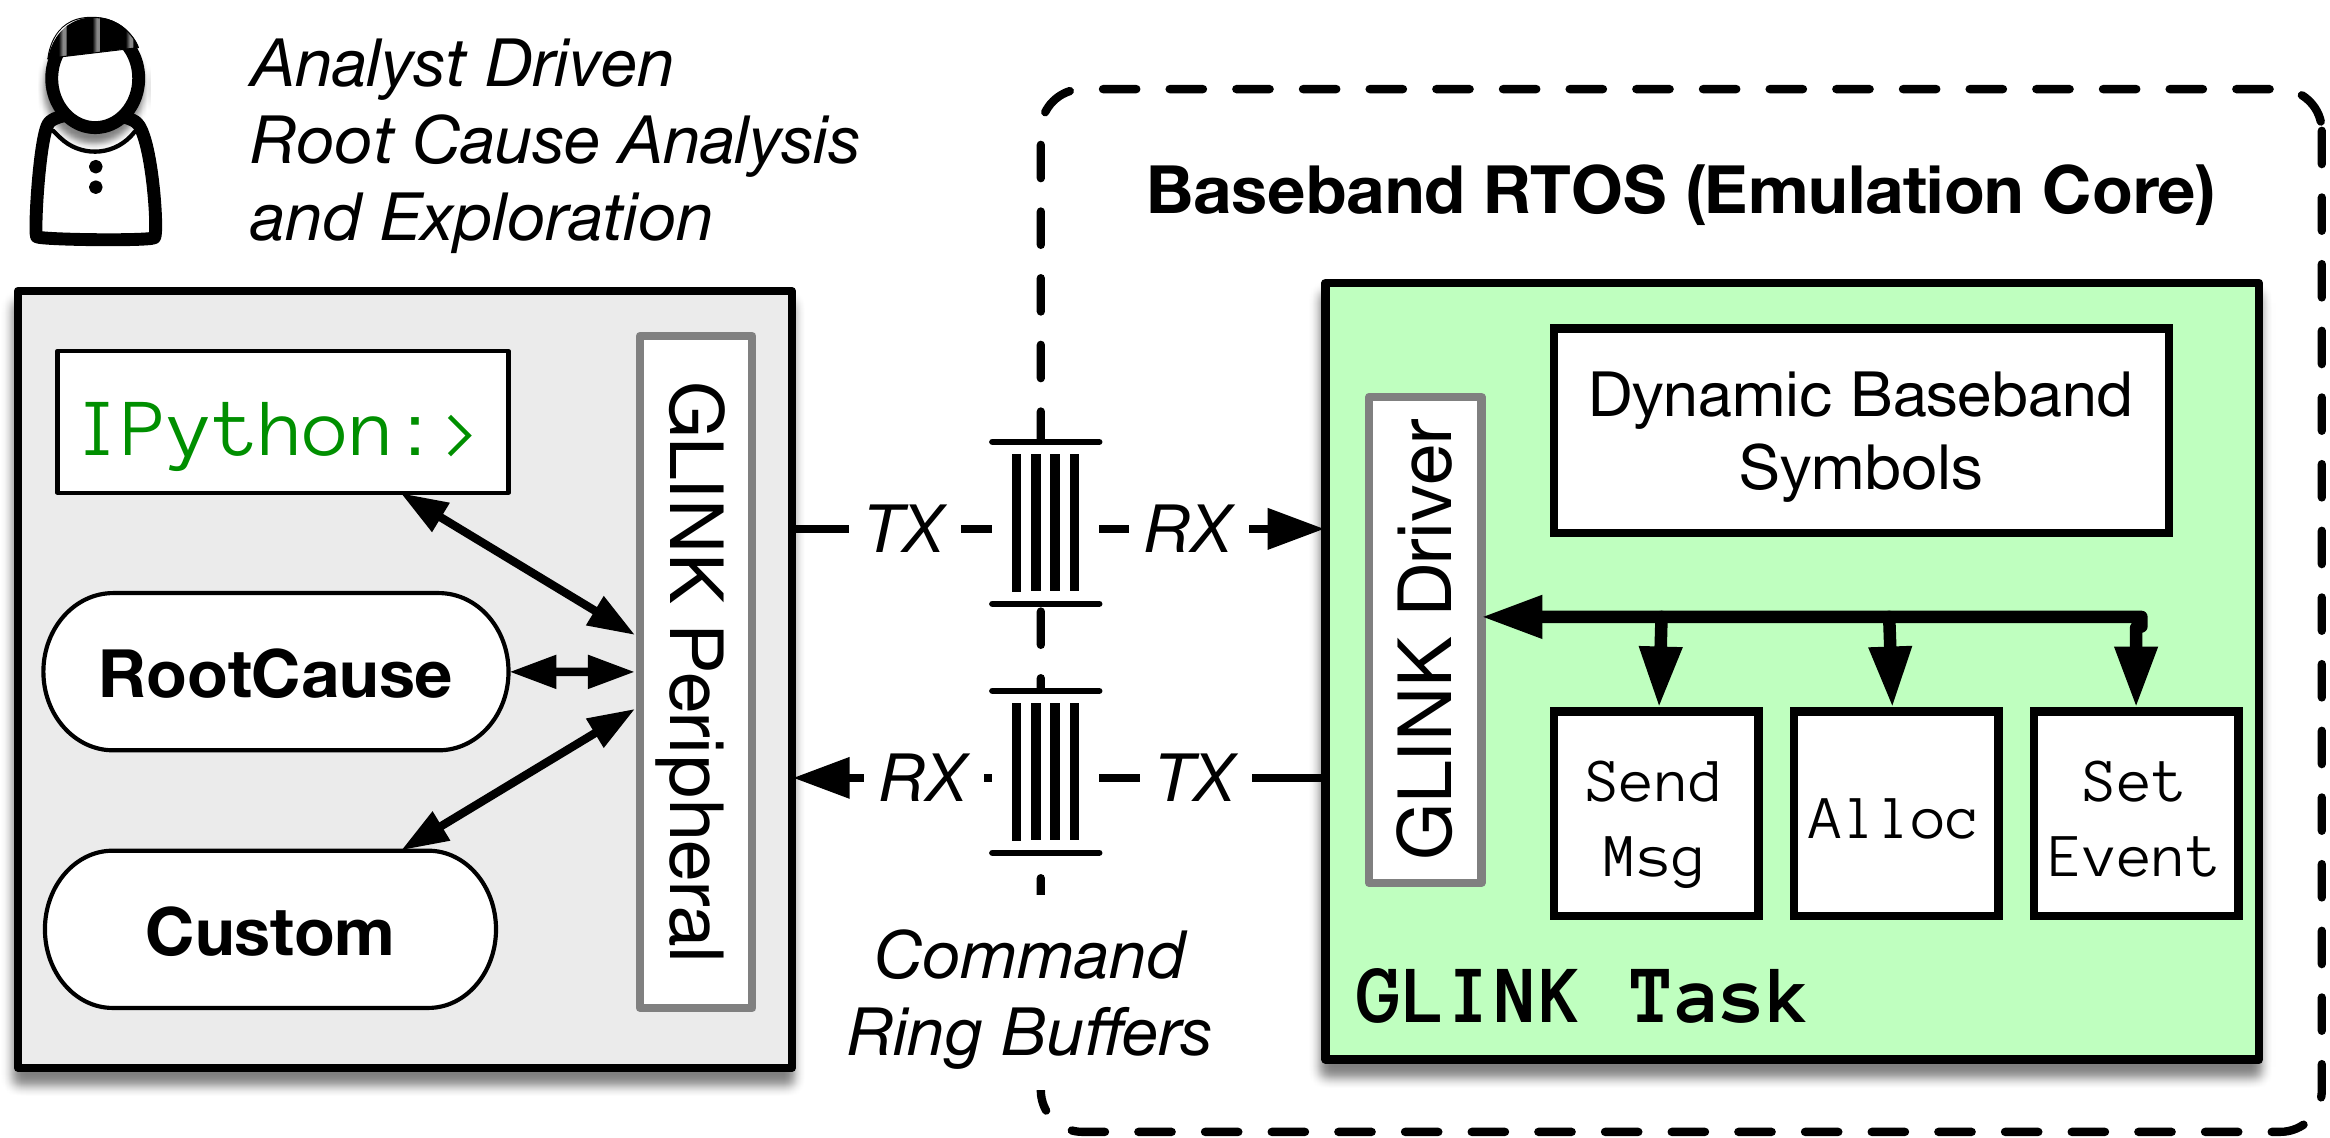 An overview of the layout and communication between
FirmWire and the injected Guest Link (GLINK) RTOS task.
An analyst can use the GLINK interface to manually send ad-hoc
commands or execute one-shot analyses. These commands
are effectively remote procedure calls serialized across a ring-buffer
peripheral that the GLINK task can access.
